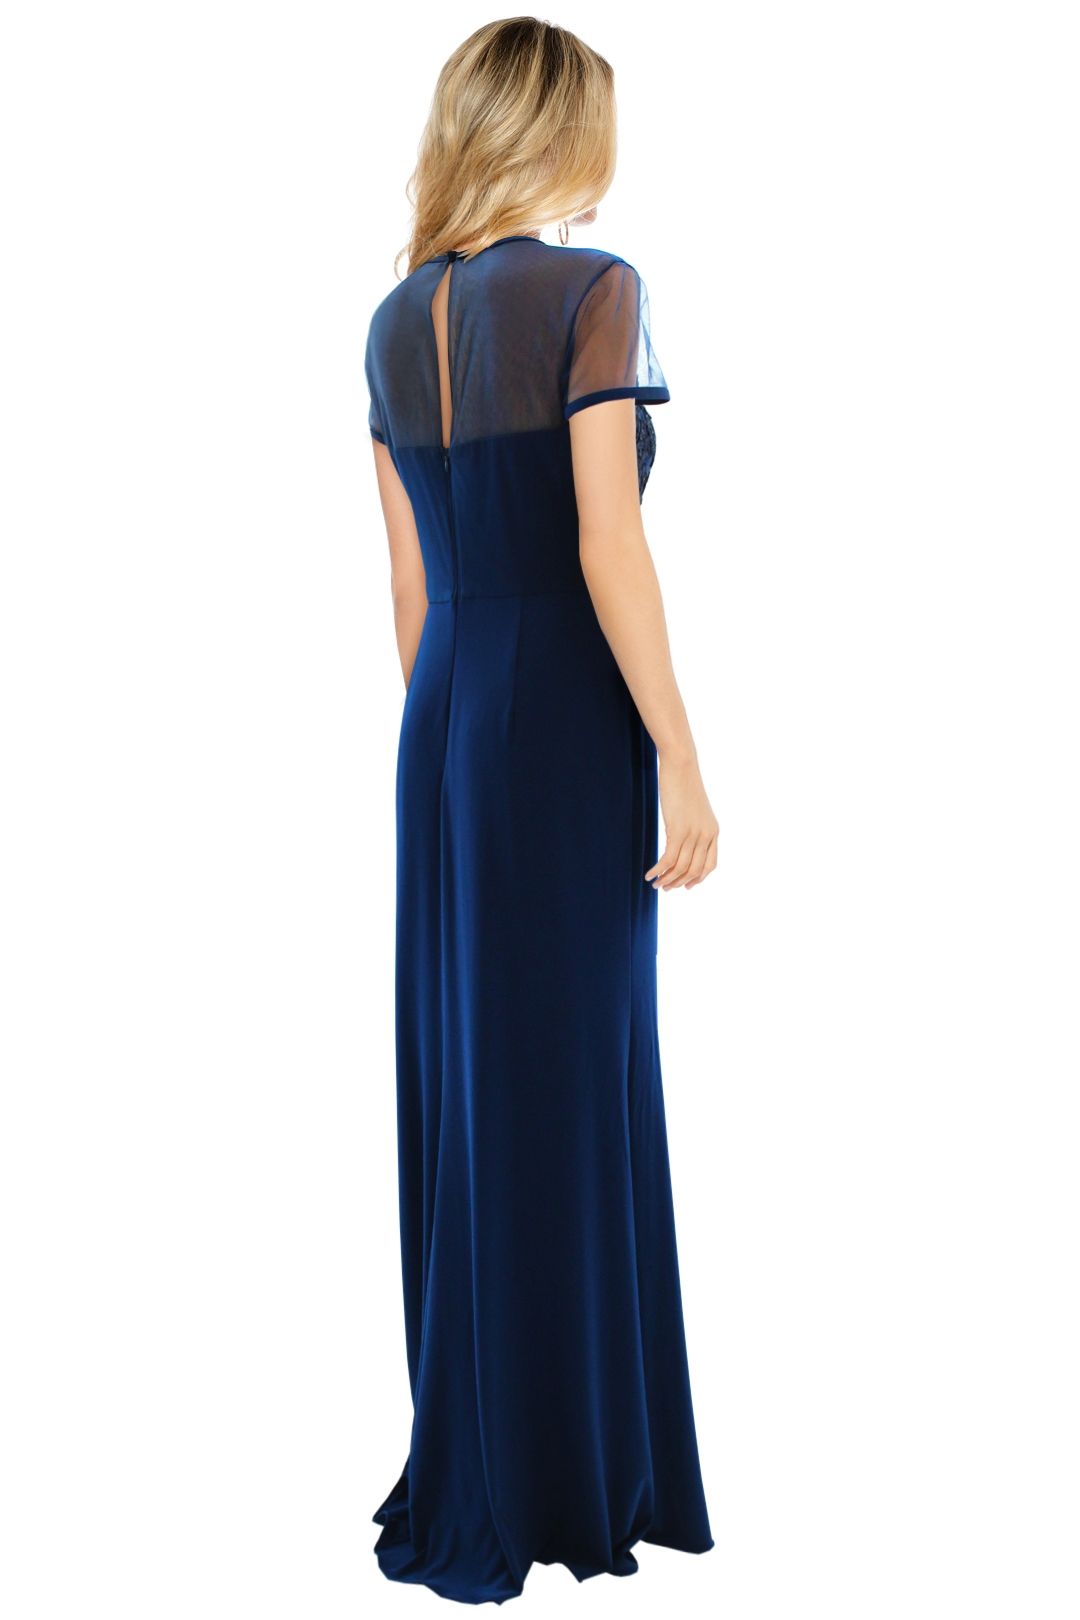 George - Seraphina Gown - Blue - Back